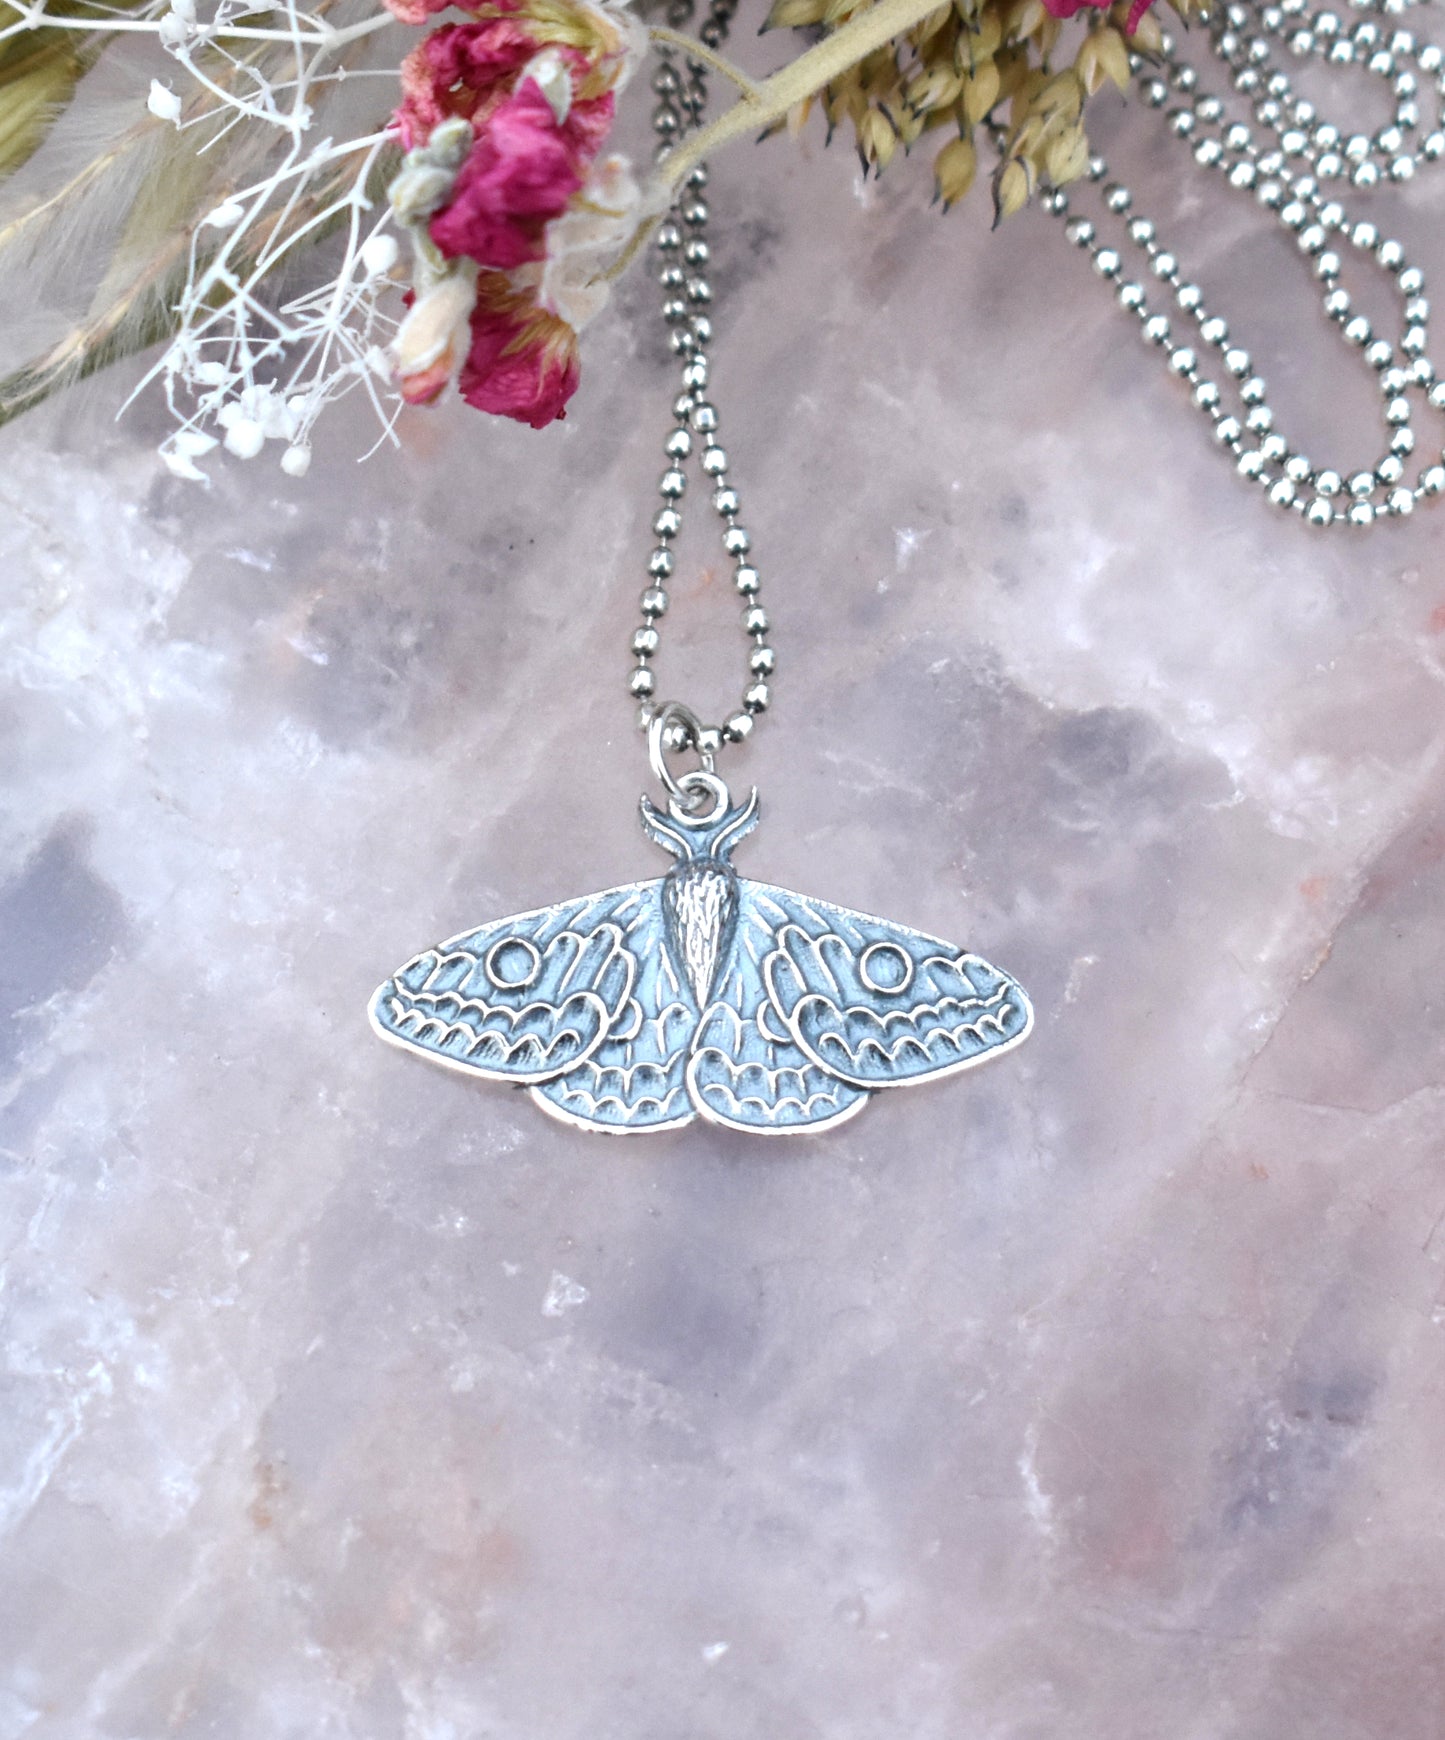 Moth Necklace- Moth Jewelry, Butterfly Necklace, Forest Necklace- Silver Necklace